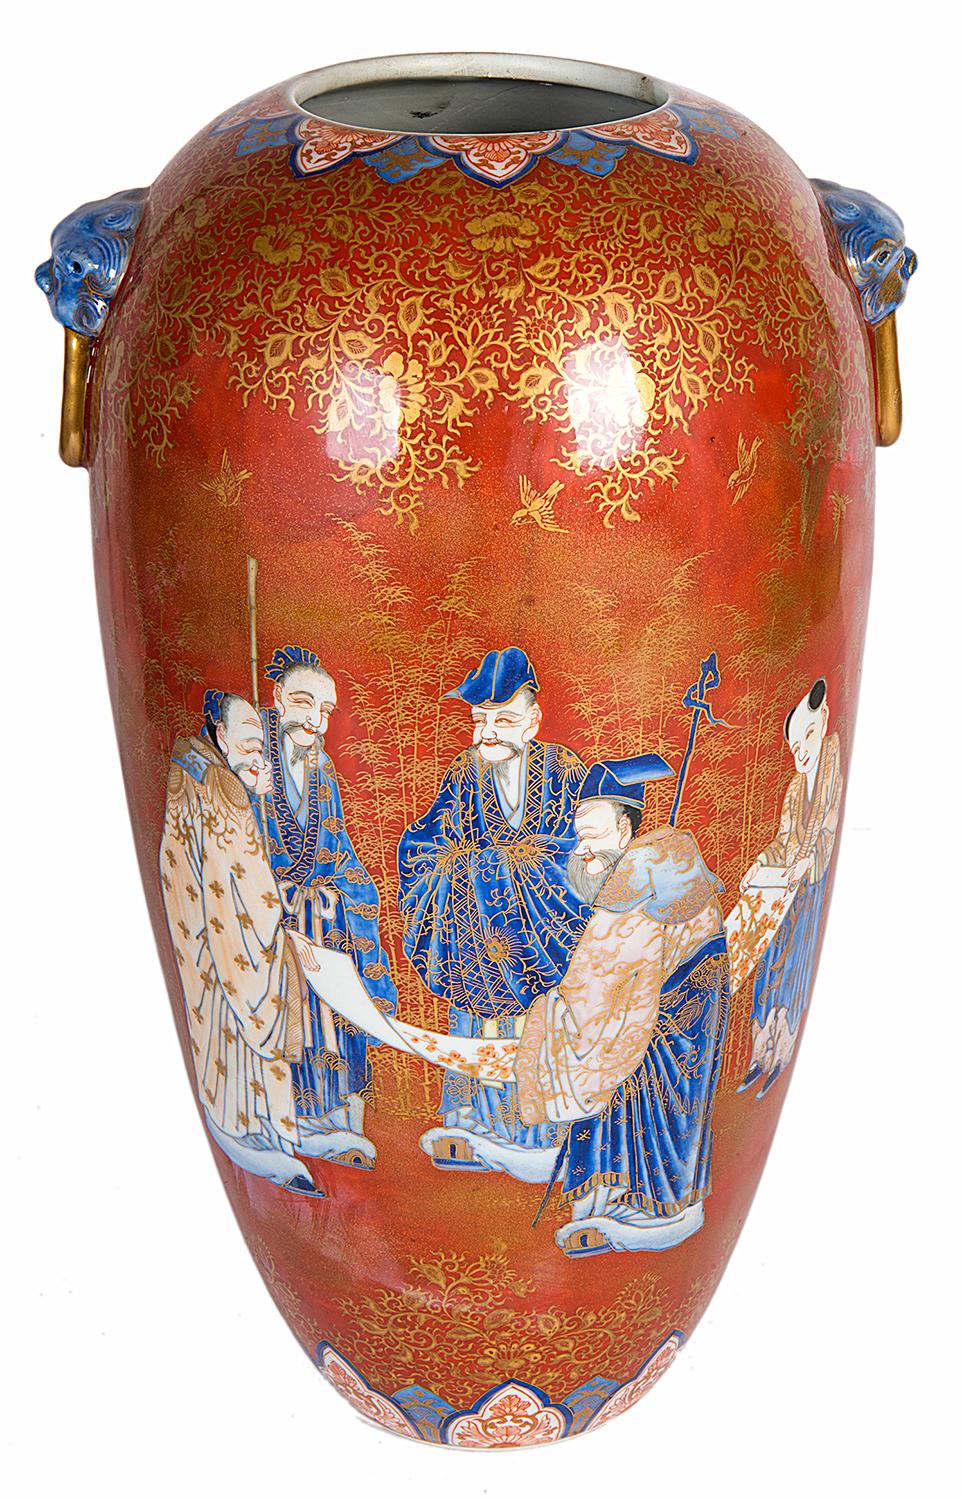 A very good quality 19th century Japanese Fukagawa porcelain vase. Having orange ground with gilded foliate decoration, lion mask ring drop handles, various scholars holding a scroll.